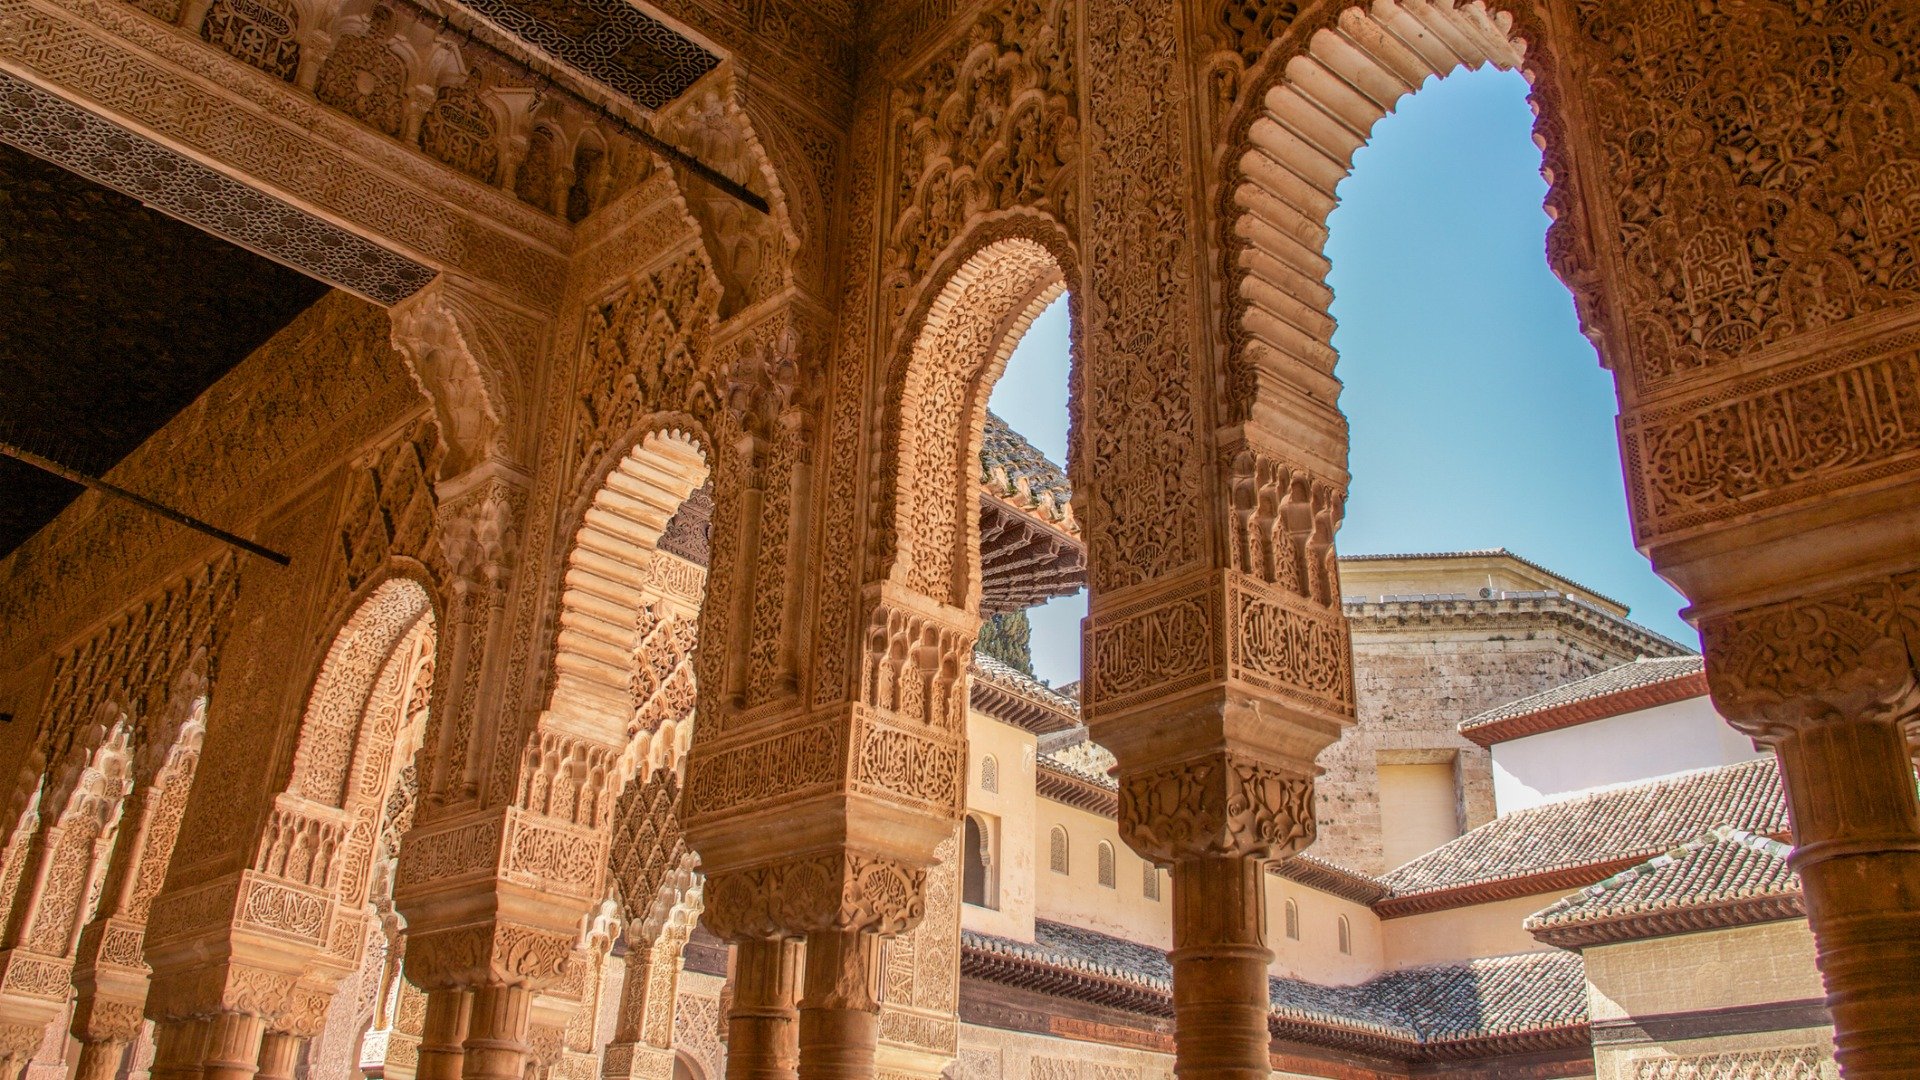 Details of the architecture inside the Alhambra. 